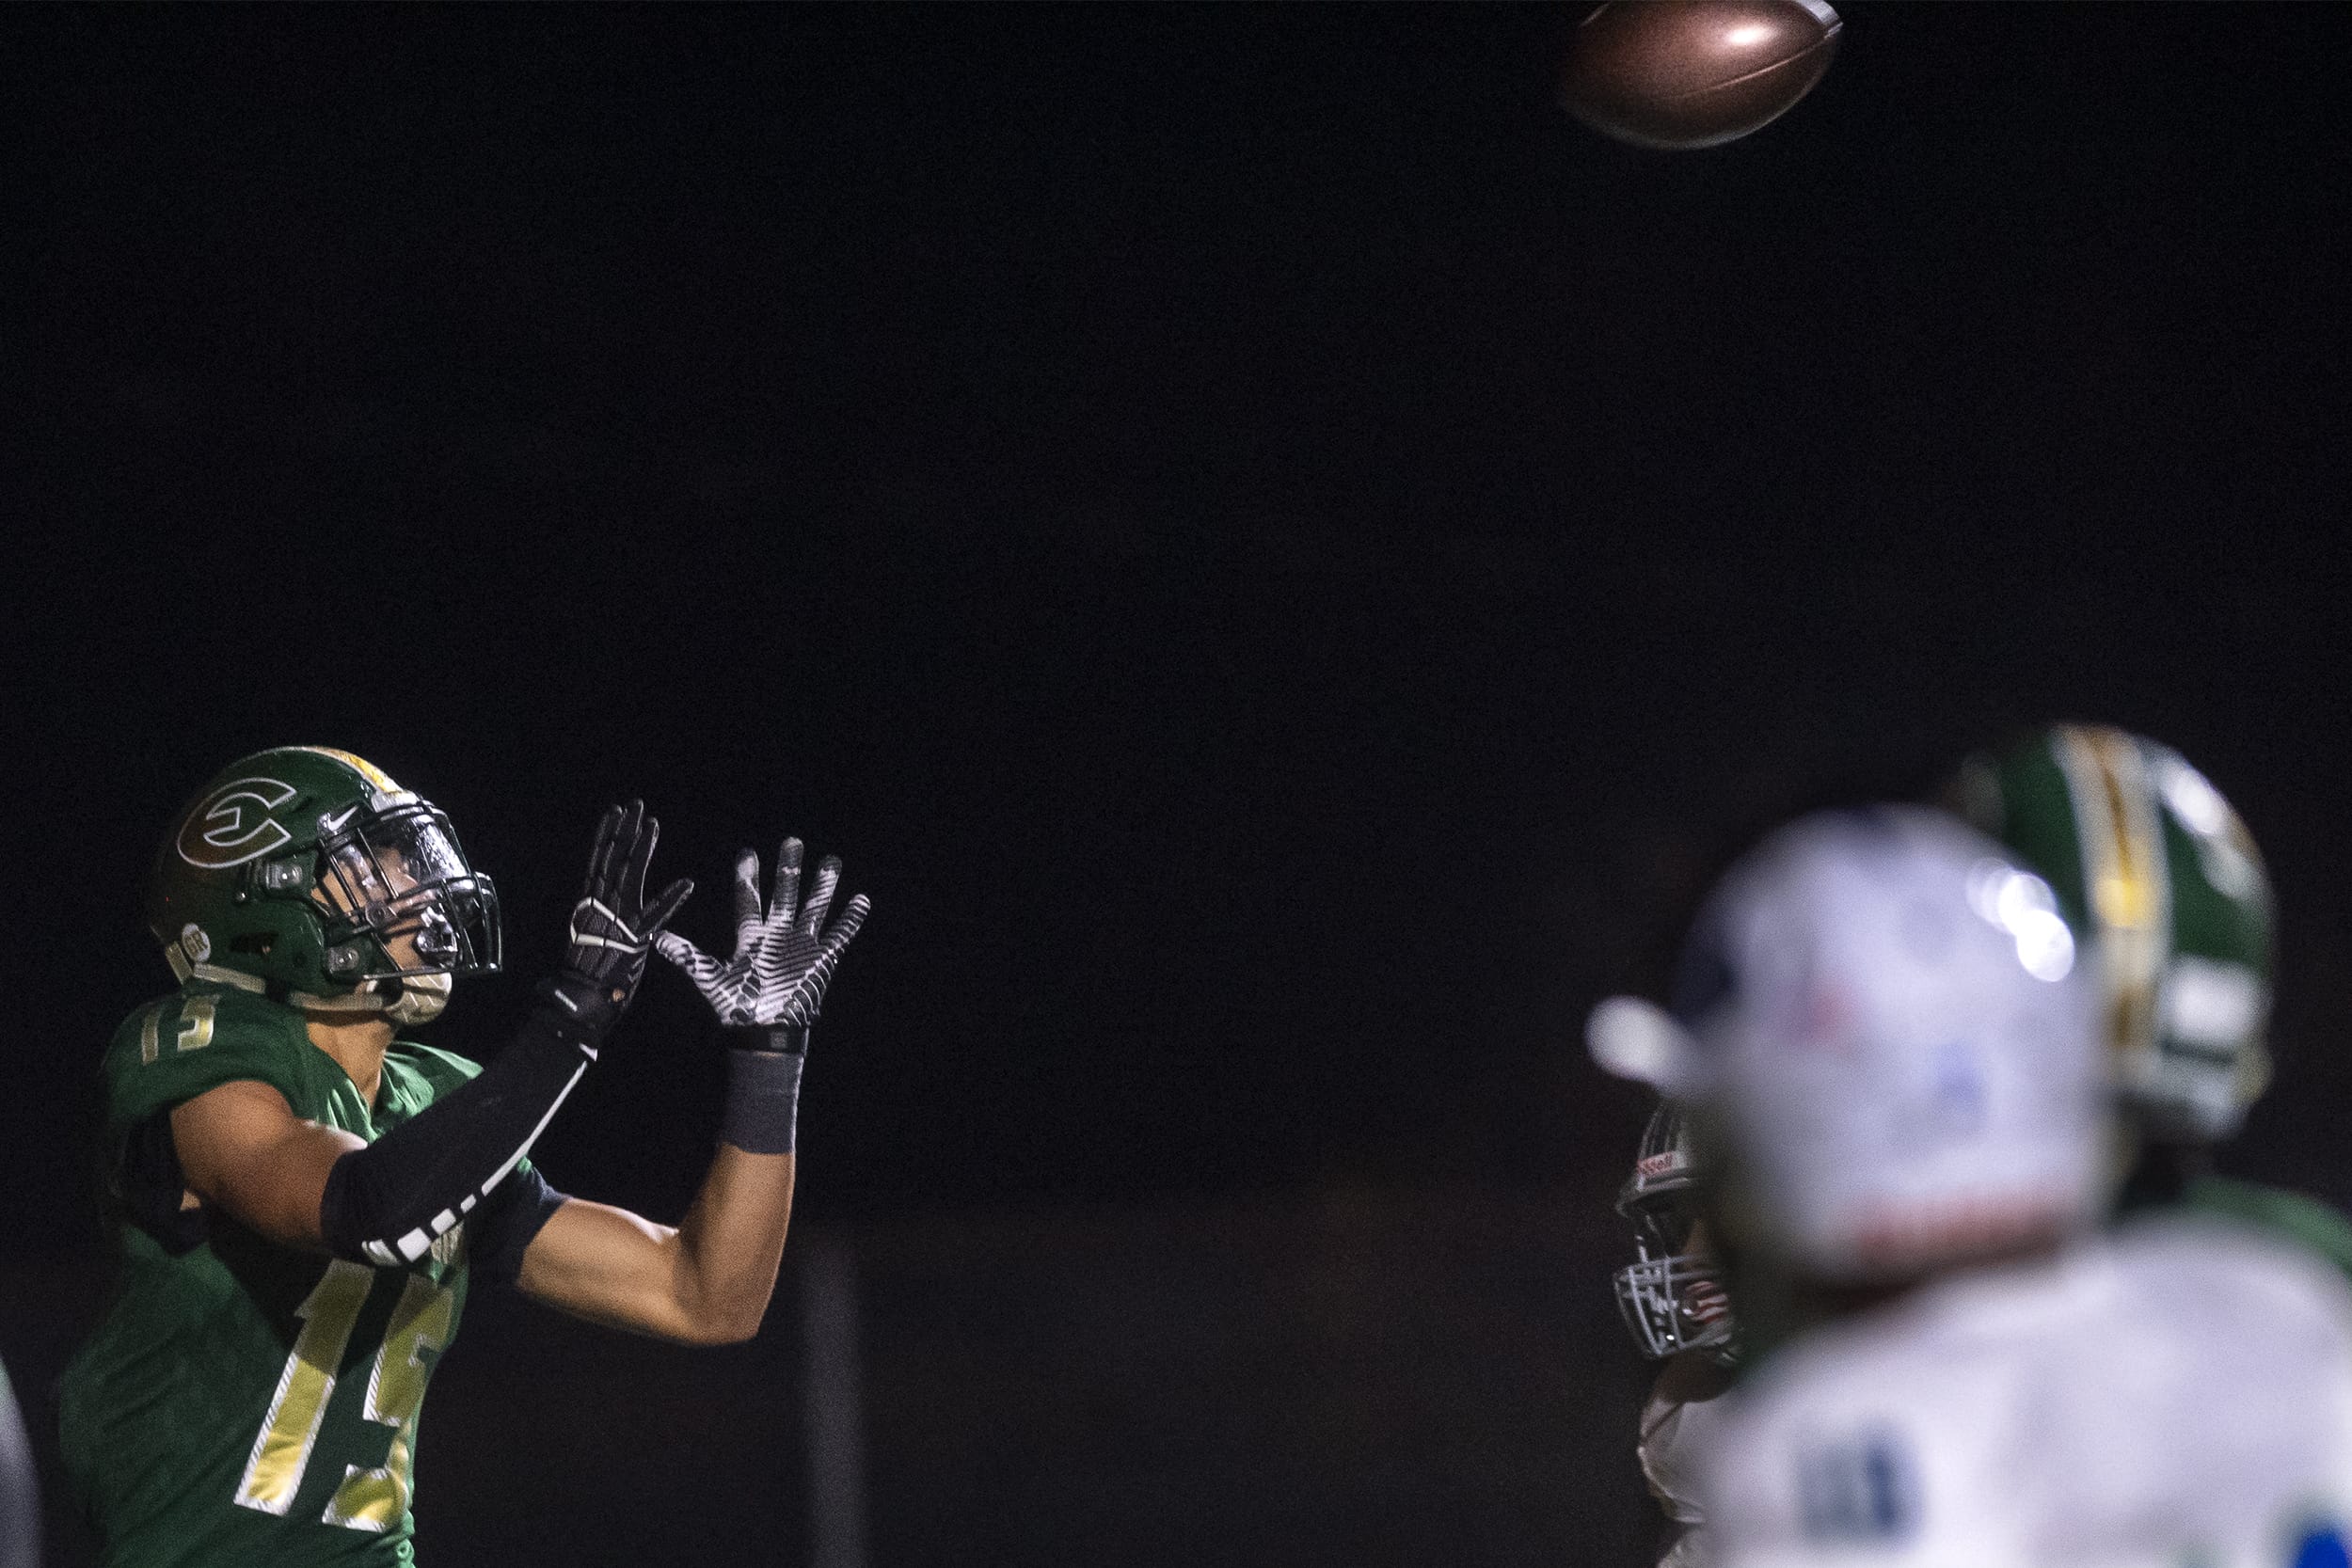 Evergreen's Tae Marks catches the game winning pass during a game against Mountain View at McKenzie Stadium on Friday night, Oct. 18, 2019.